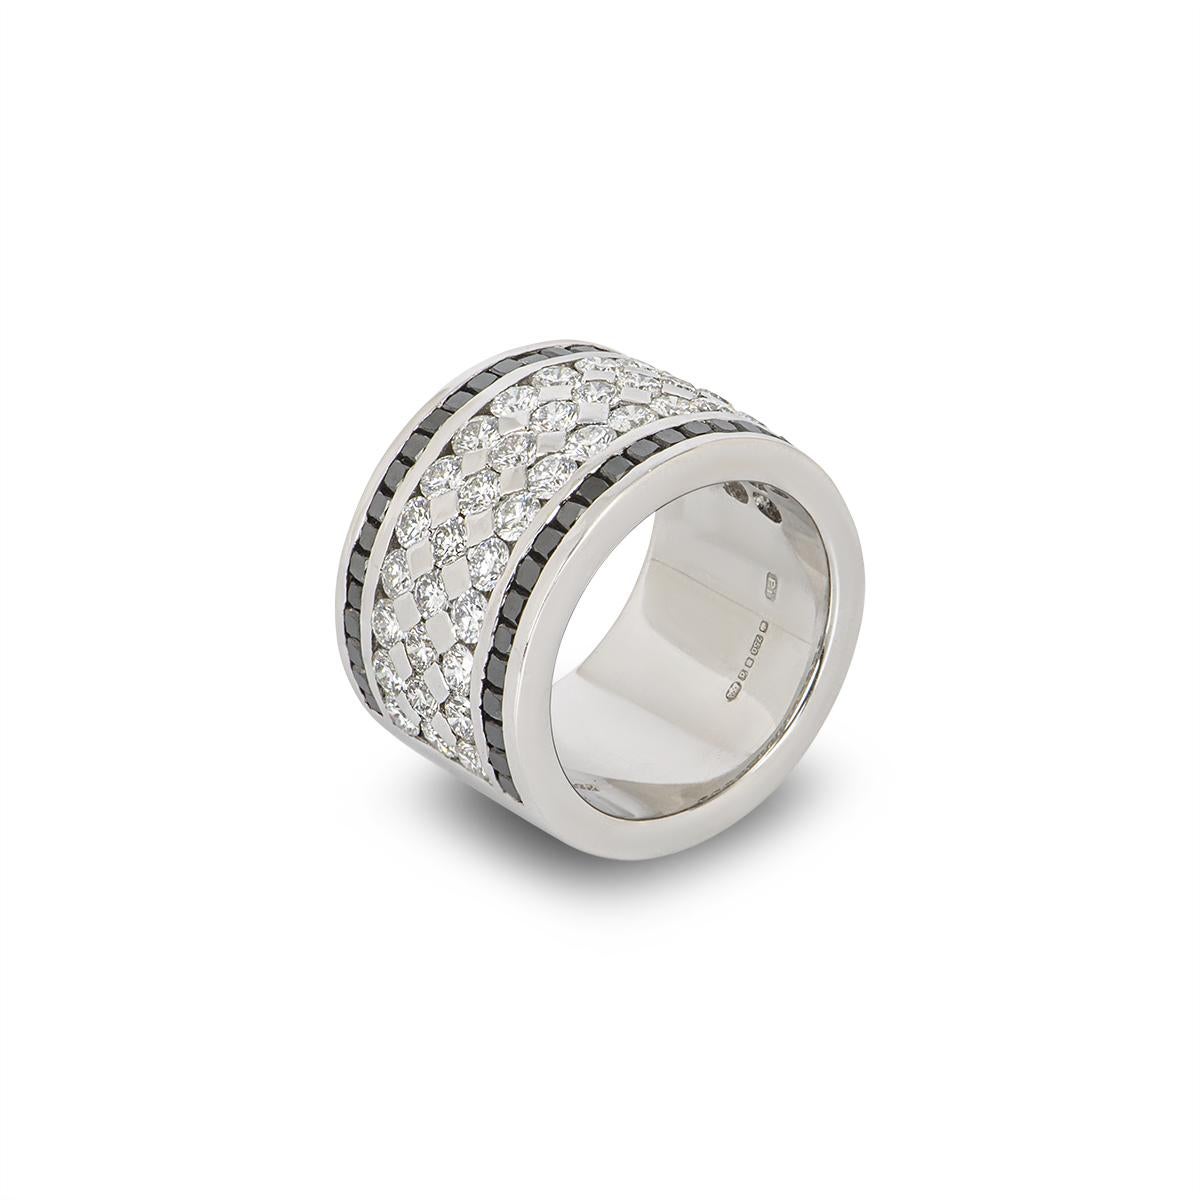 A stunning 18k white gold diamond band ring. The ring comprises of 42 round brilliant cut diamonds set across 3 rows in a tension setting, with a total diamond weight of approximately 1.40ct, G coloue VS clarity. Complimenting this is a row of